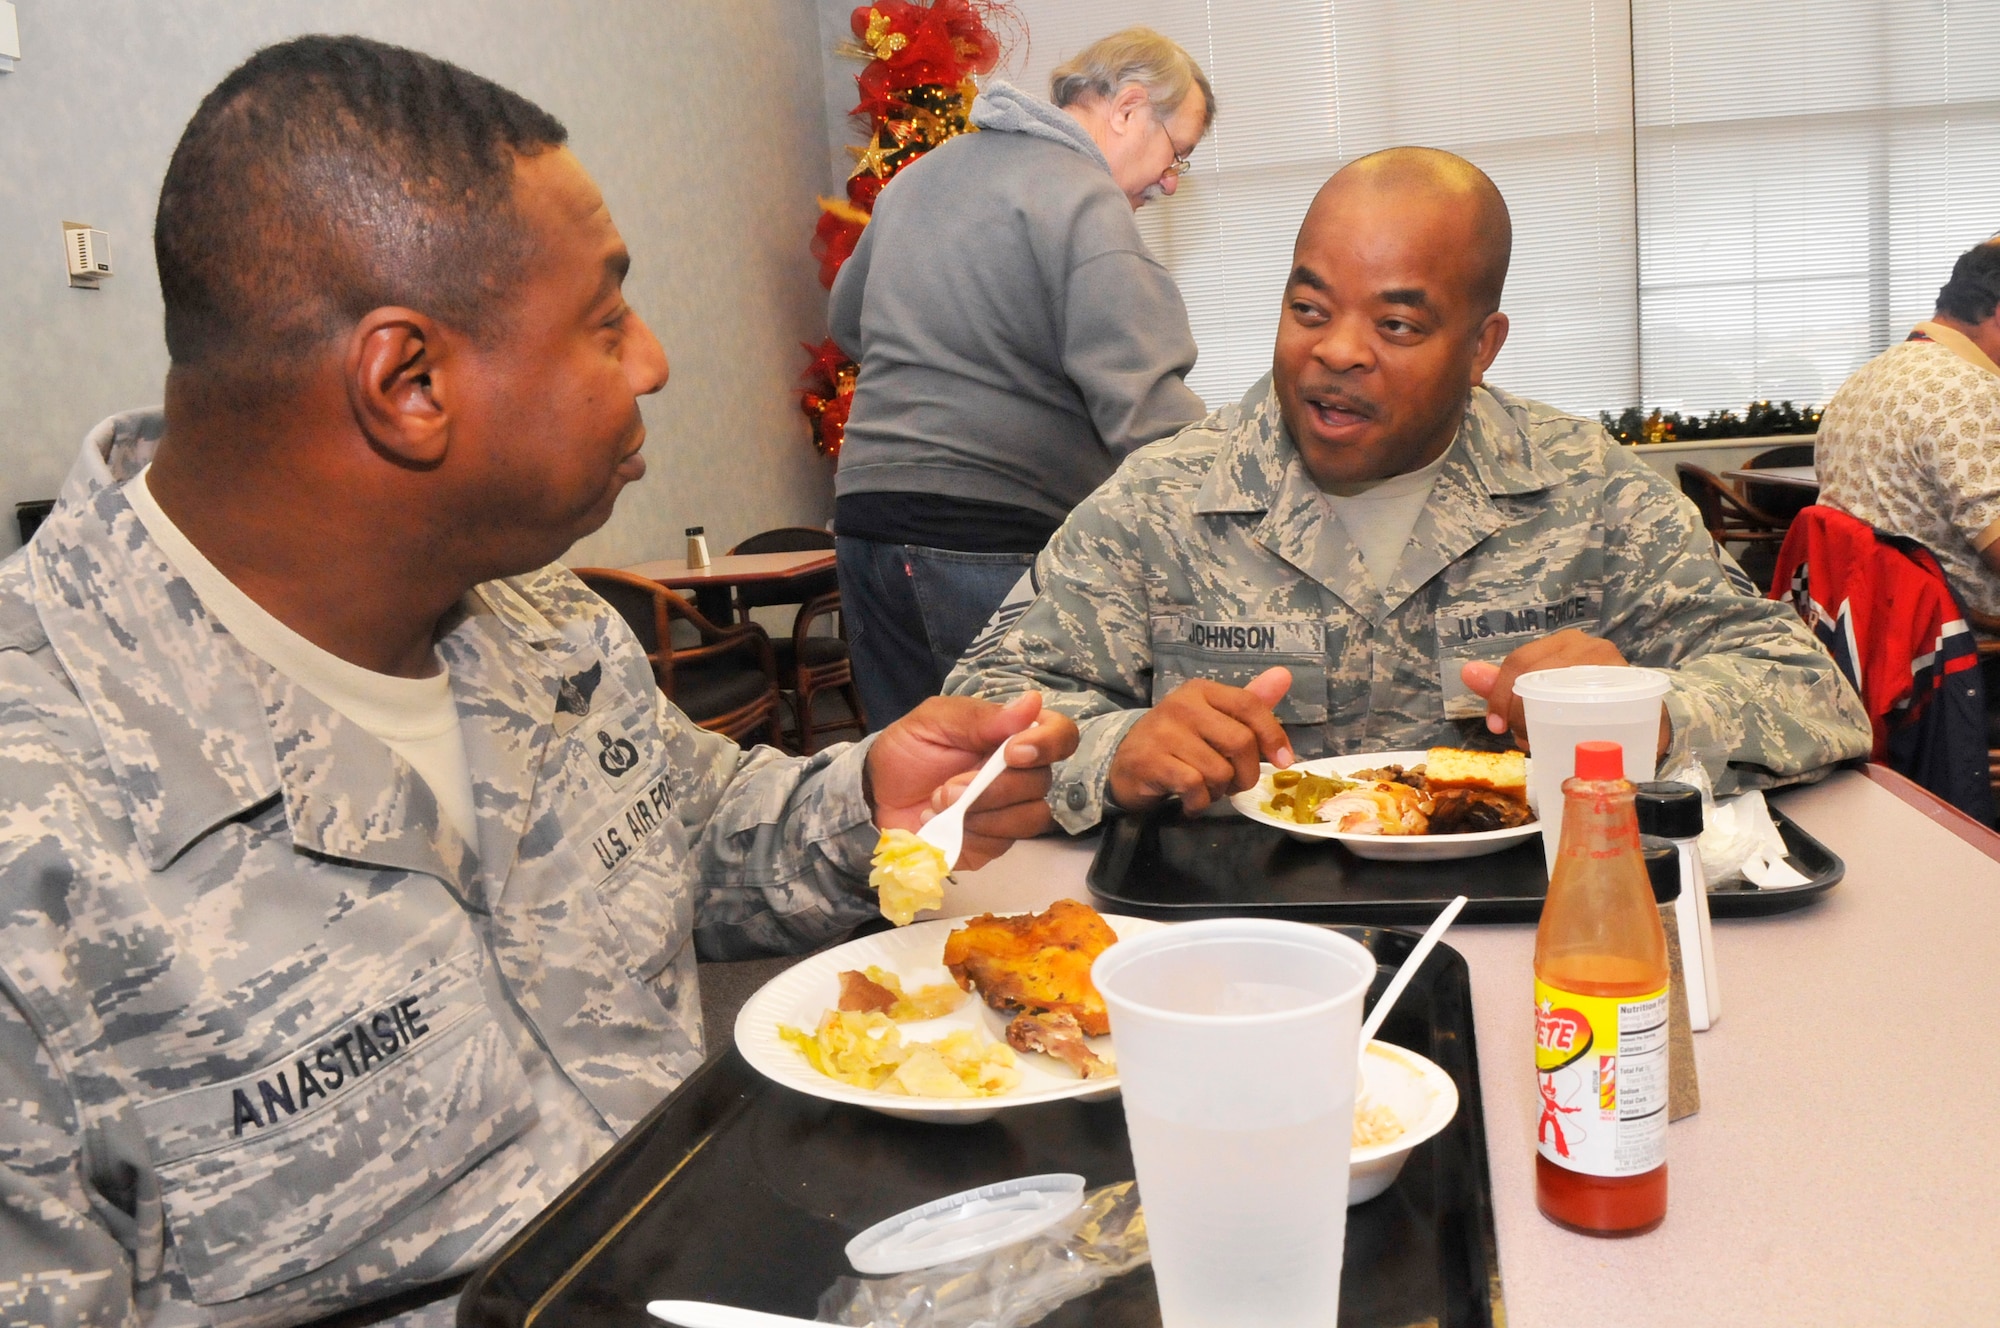 L-R, Chief Master Sgt. Lorenzo Anastasie, 116th Air Control Wing Command Chief, and Master Sgt. Jonathan Johnson, 116th ACW, enjoy a meal at "The Quick Turn", formerly known as the Flight line dining facility.   (U. S. Air Force photo/Sue Sapp)